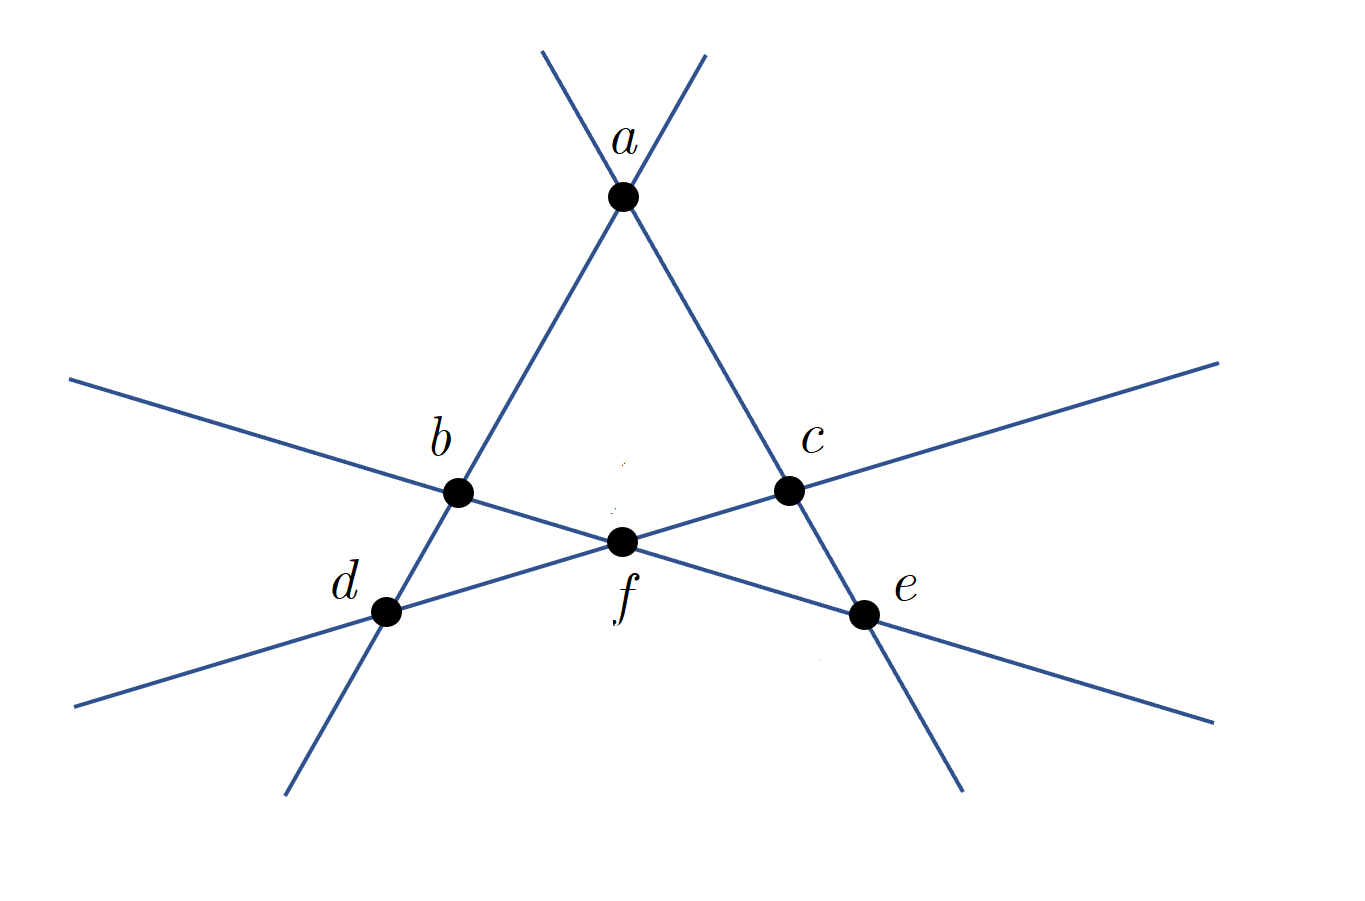 &lt;strong&gt;Figure 4.&lt;/strong&gt; Depiction of the O’Nan or Pasch configuration. Figure courtesy of Jacques Verstraete.